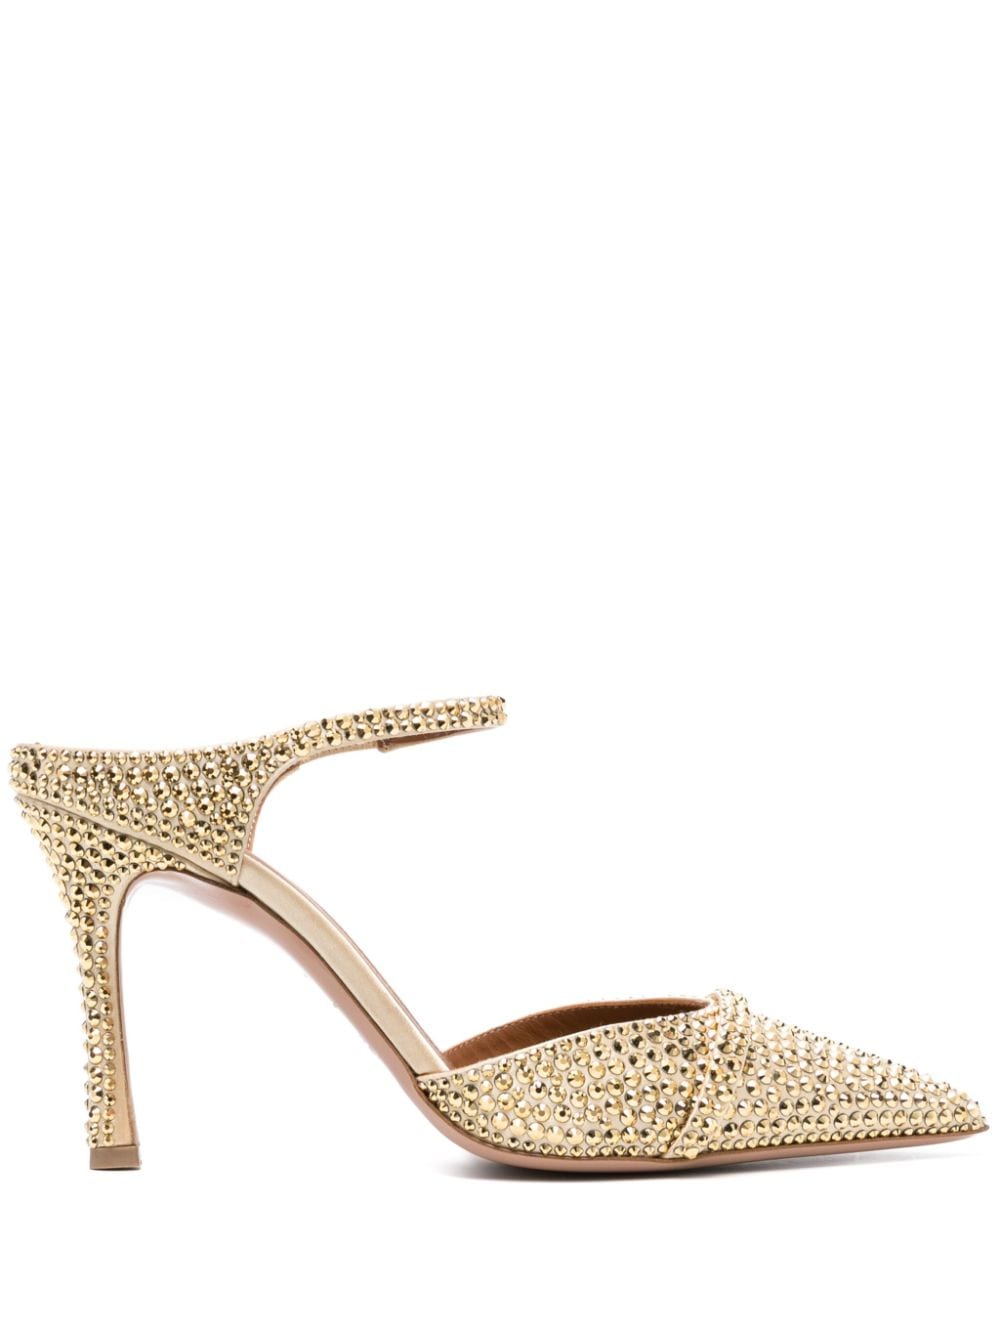 Malone Souliers Uma 90mm crystal-embellished mules - Gold von Malone Souliers